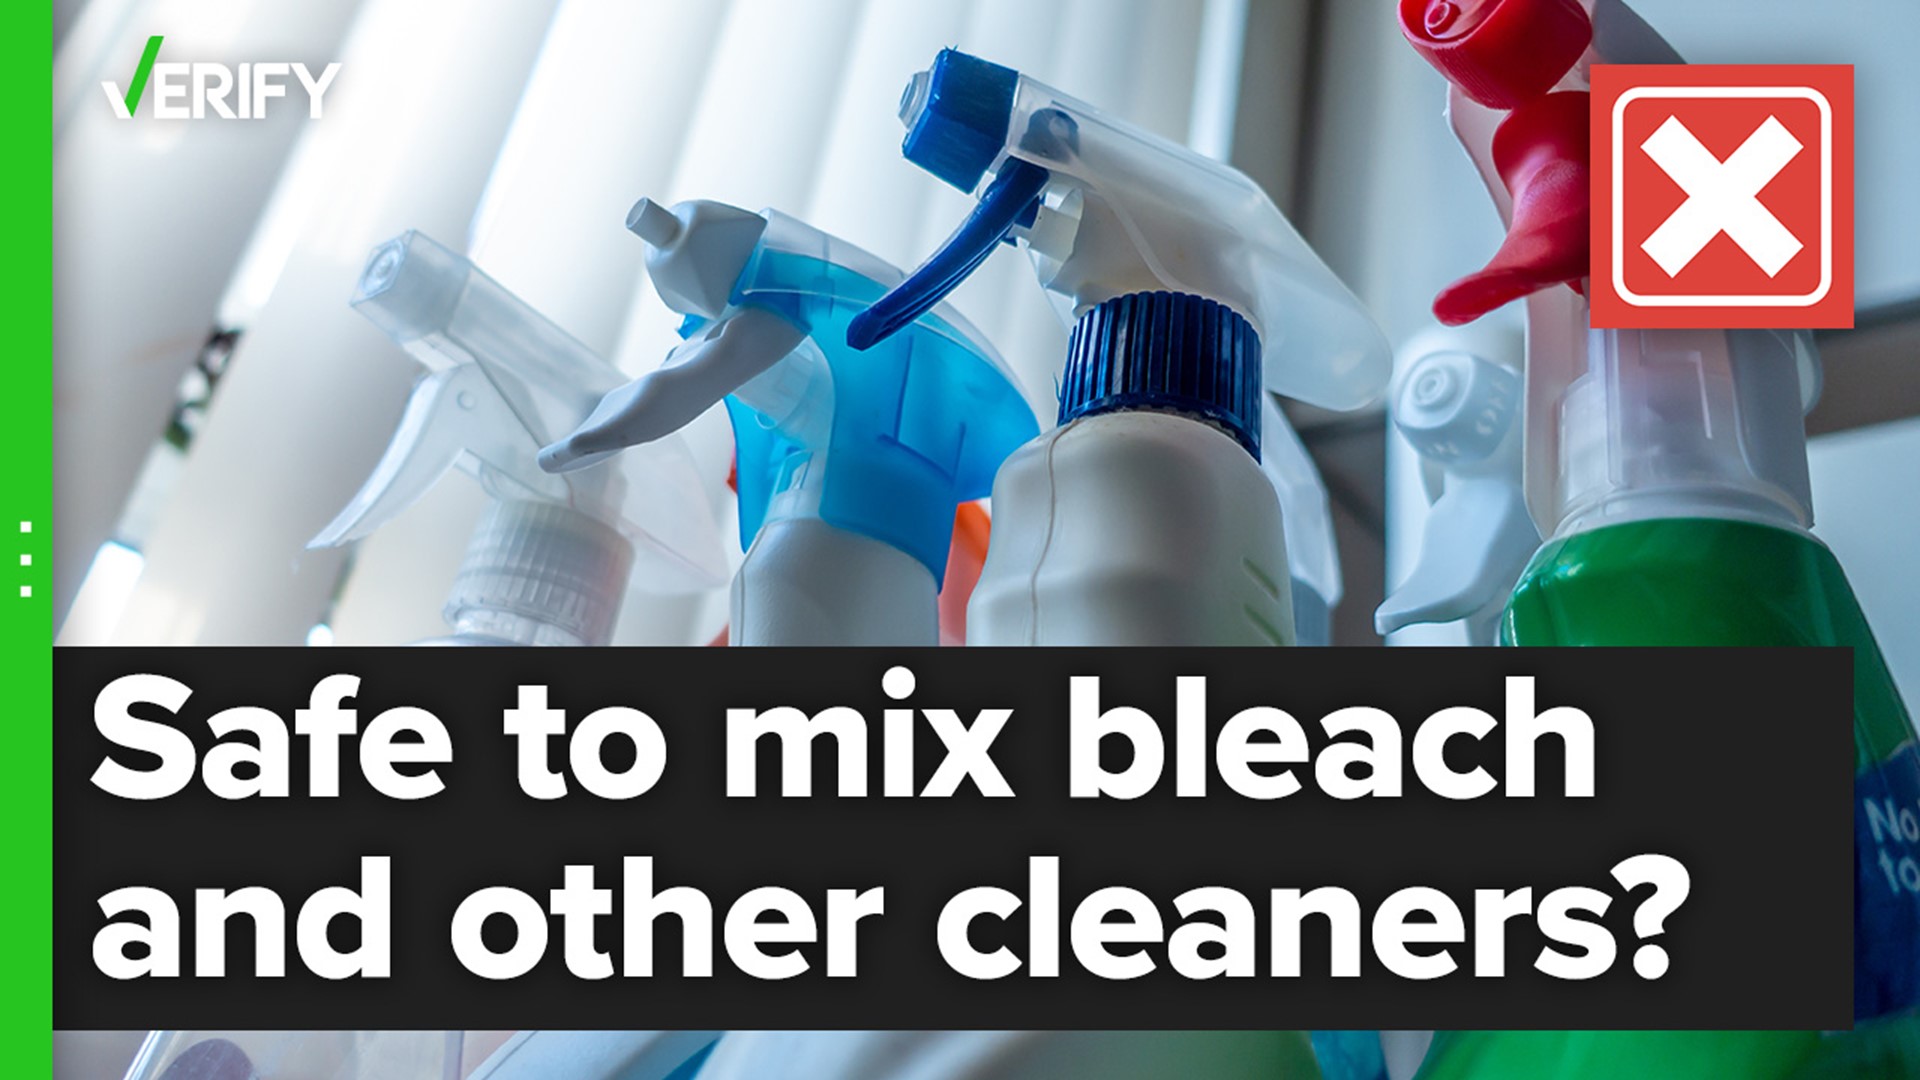 You should never mix bleach with any other household cleaners or disinfectants because doing so could create toxic gasses that may be fatal.